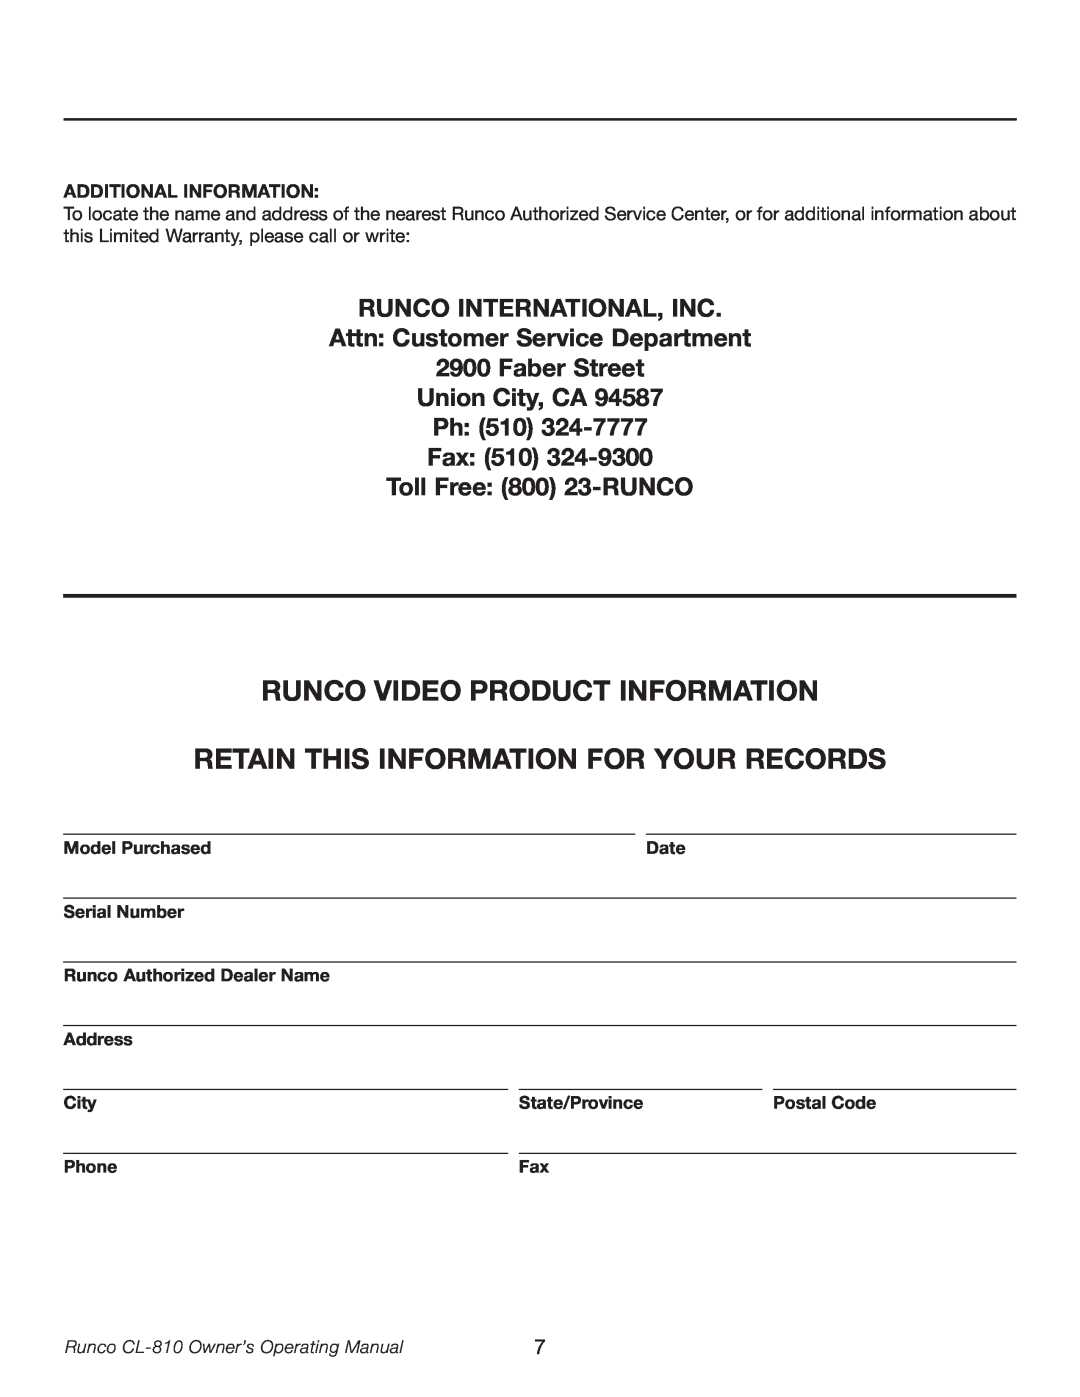 Runco CL-810 Runco Video Product Information, Retain This Information For Your Records, Toll Free 800 23-RUNCO, Date, City 